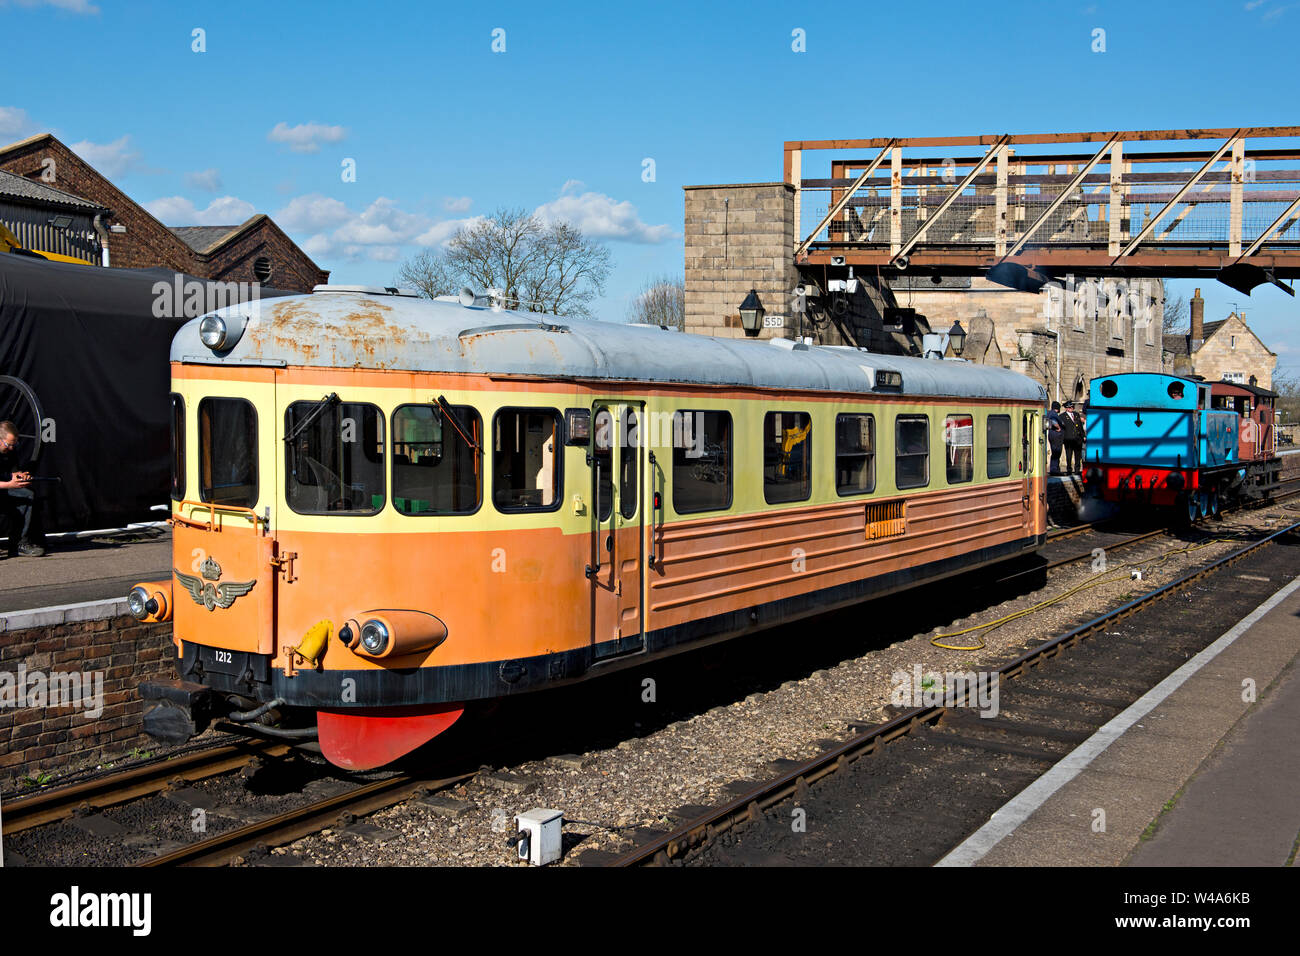 SJ (Swedish Railways) Y7 Railcar 1212 'HELGA' now preserved and operational in 2019 on the Nene Valley Railway at Wansford, UK Stock Photo